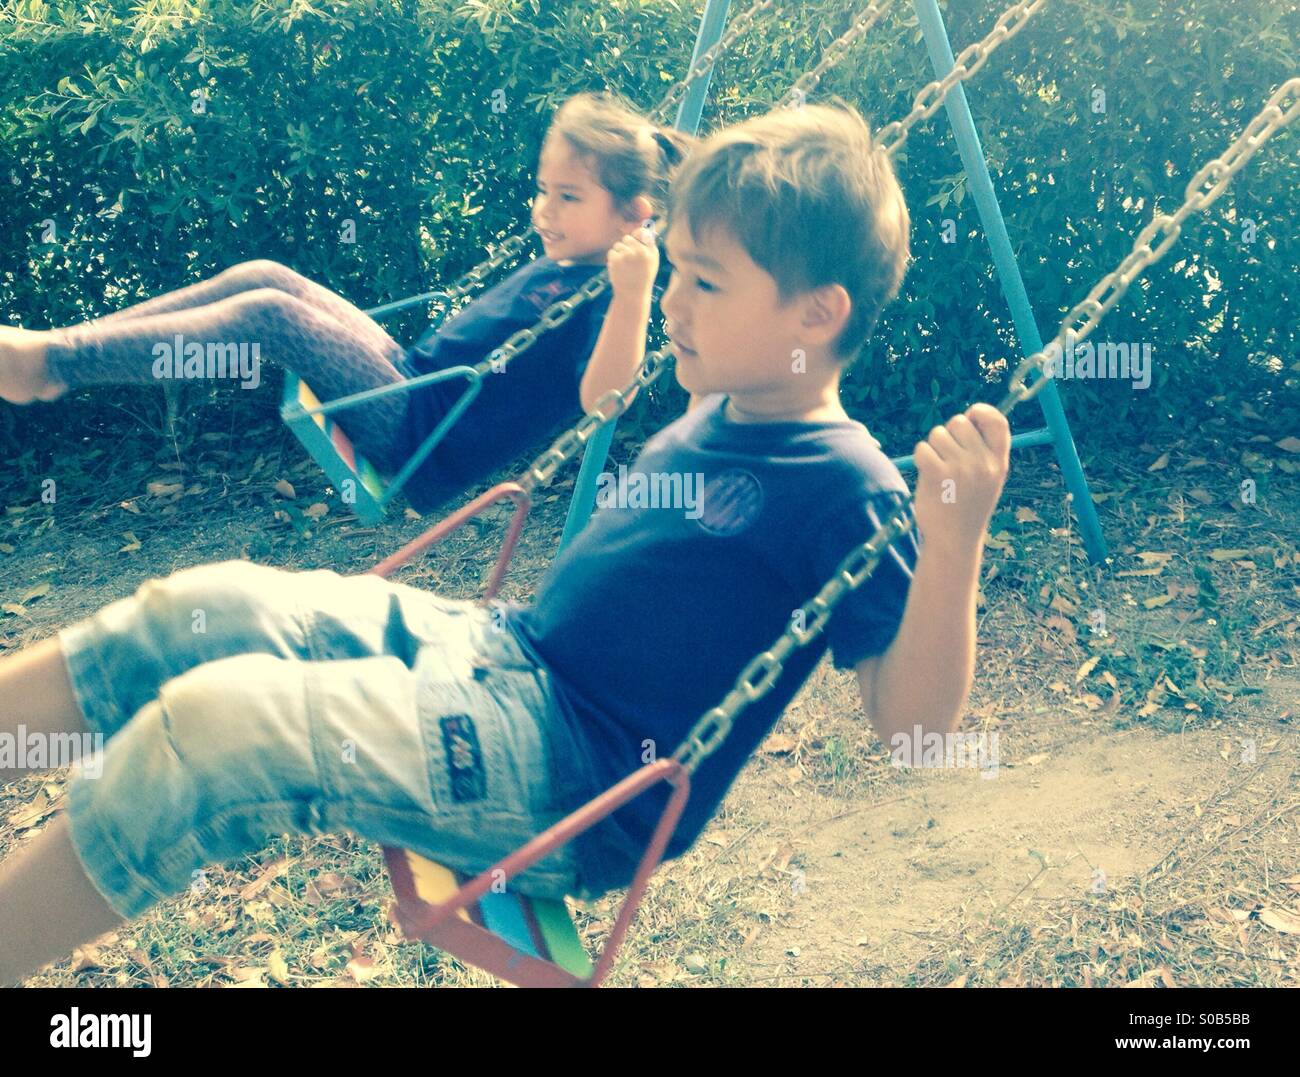 Two 5 year-old children playing on swings in a playground. Stock Photo